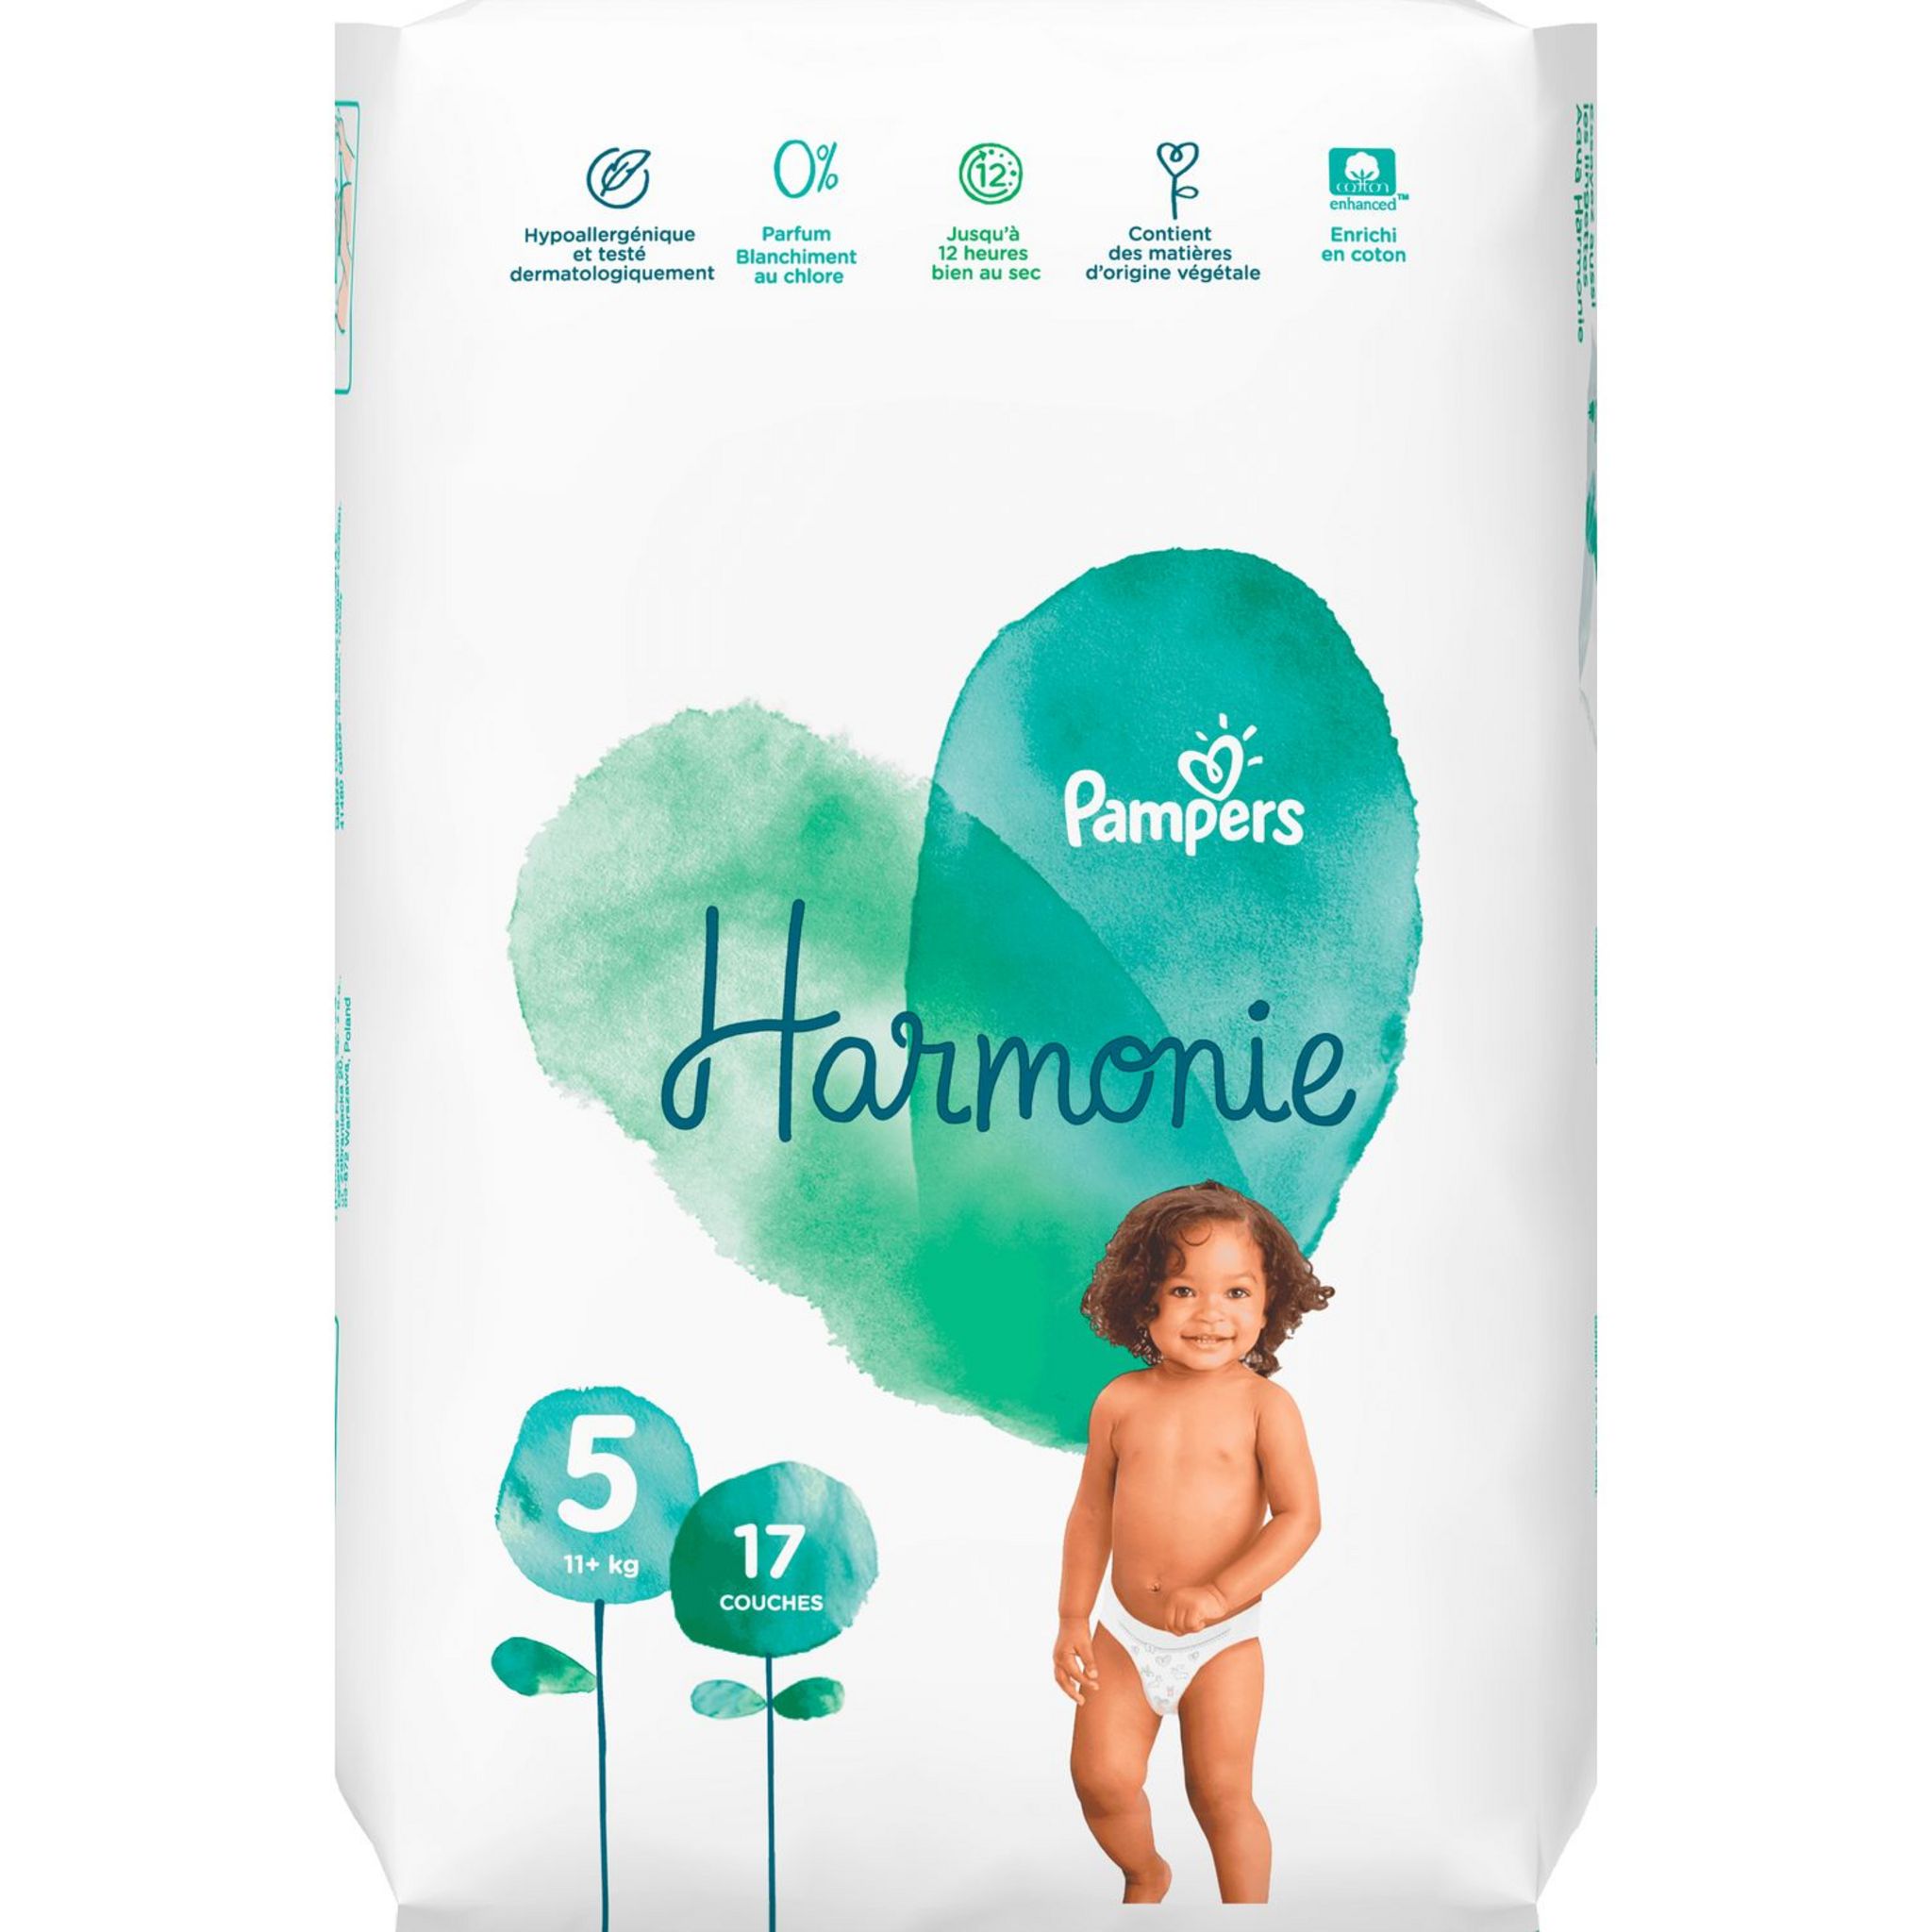 PAMPERS Harmonie couches taille 5 (+11kg) 17 couches pas cher 